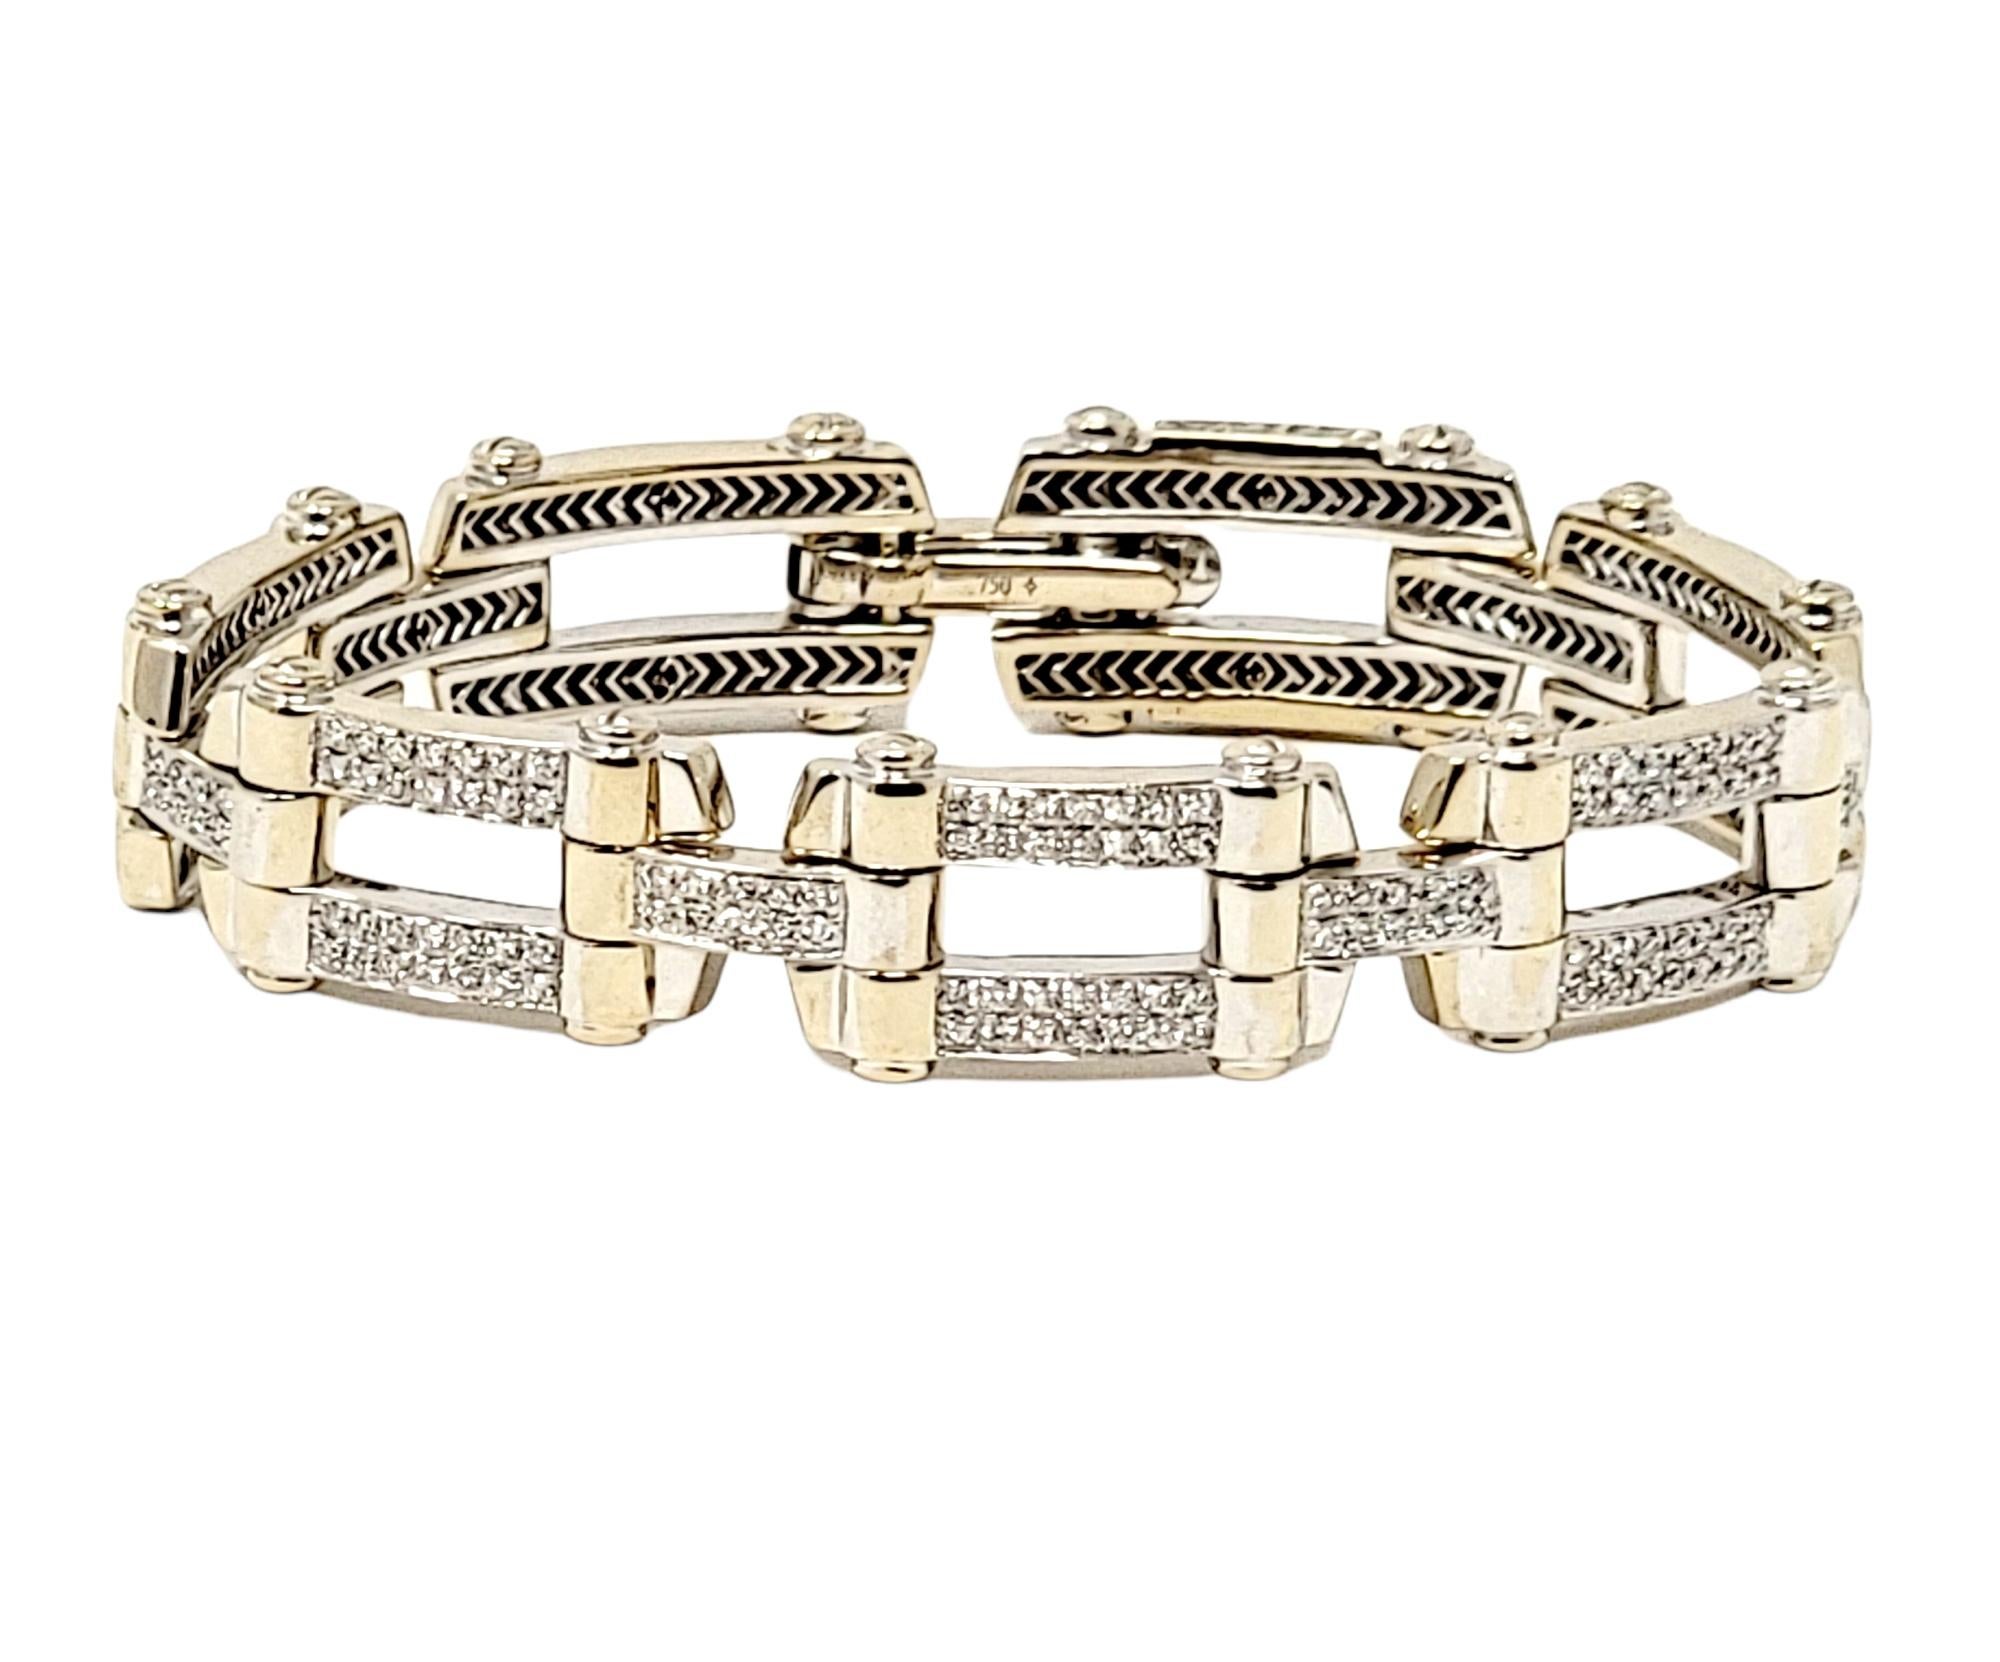 Gorgeous pave diamond and white gold link bracelet by designer Philippe Charriol. The sleek, contemporary design of this stunning piece paired with the brilliant white diamonds, really draws the viewers attention, making this a true statement piece.